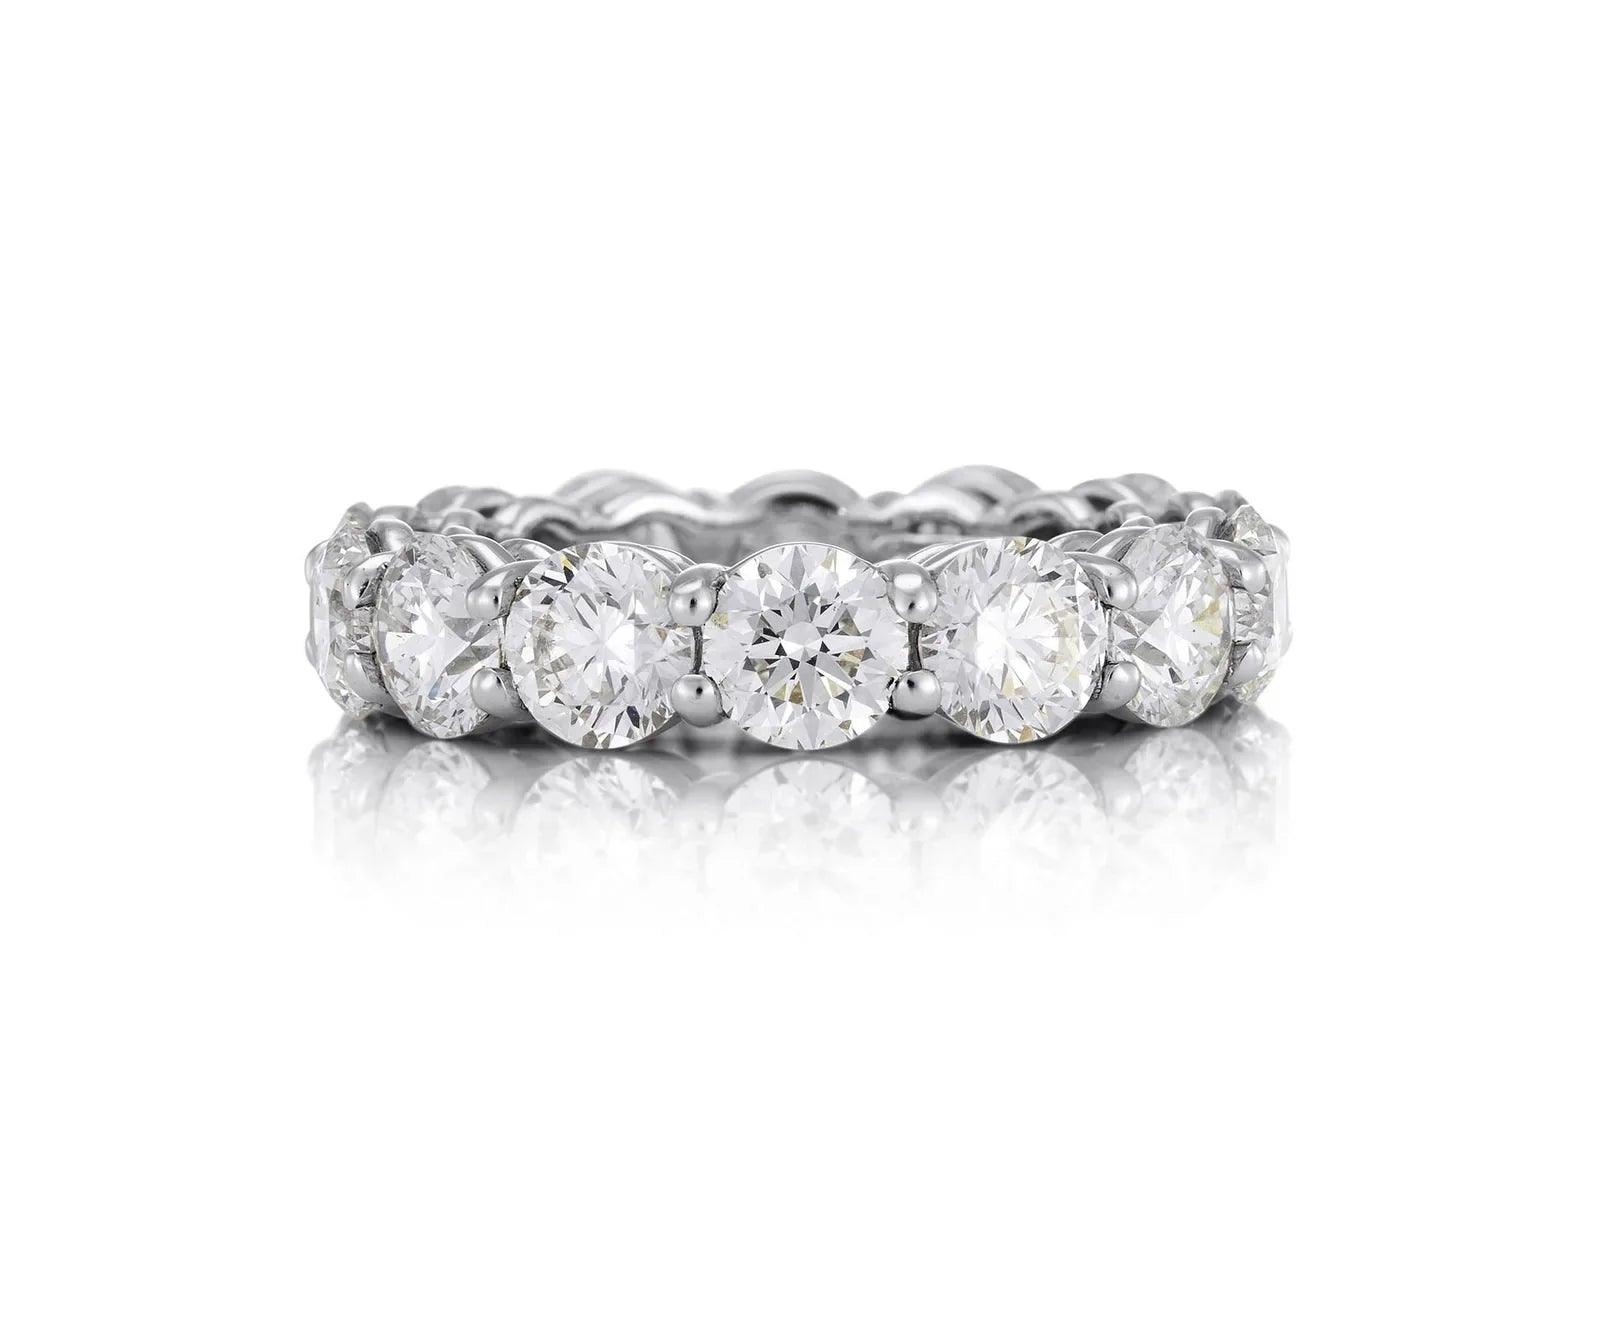 Statement Cubic Zirconia Eternity Band Ring | Sterling Silver - Camillaboutiqueco